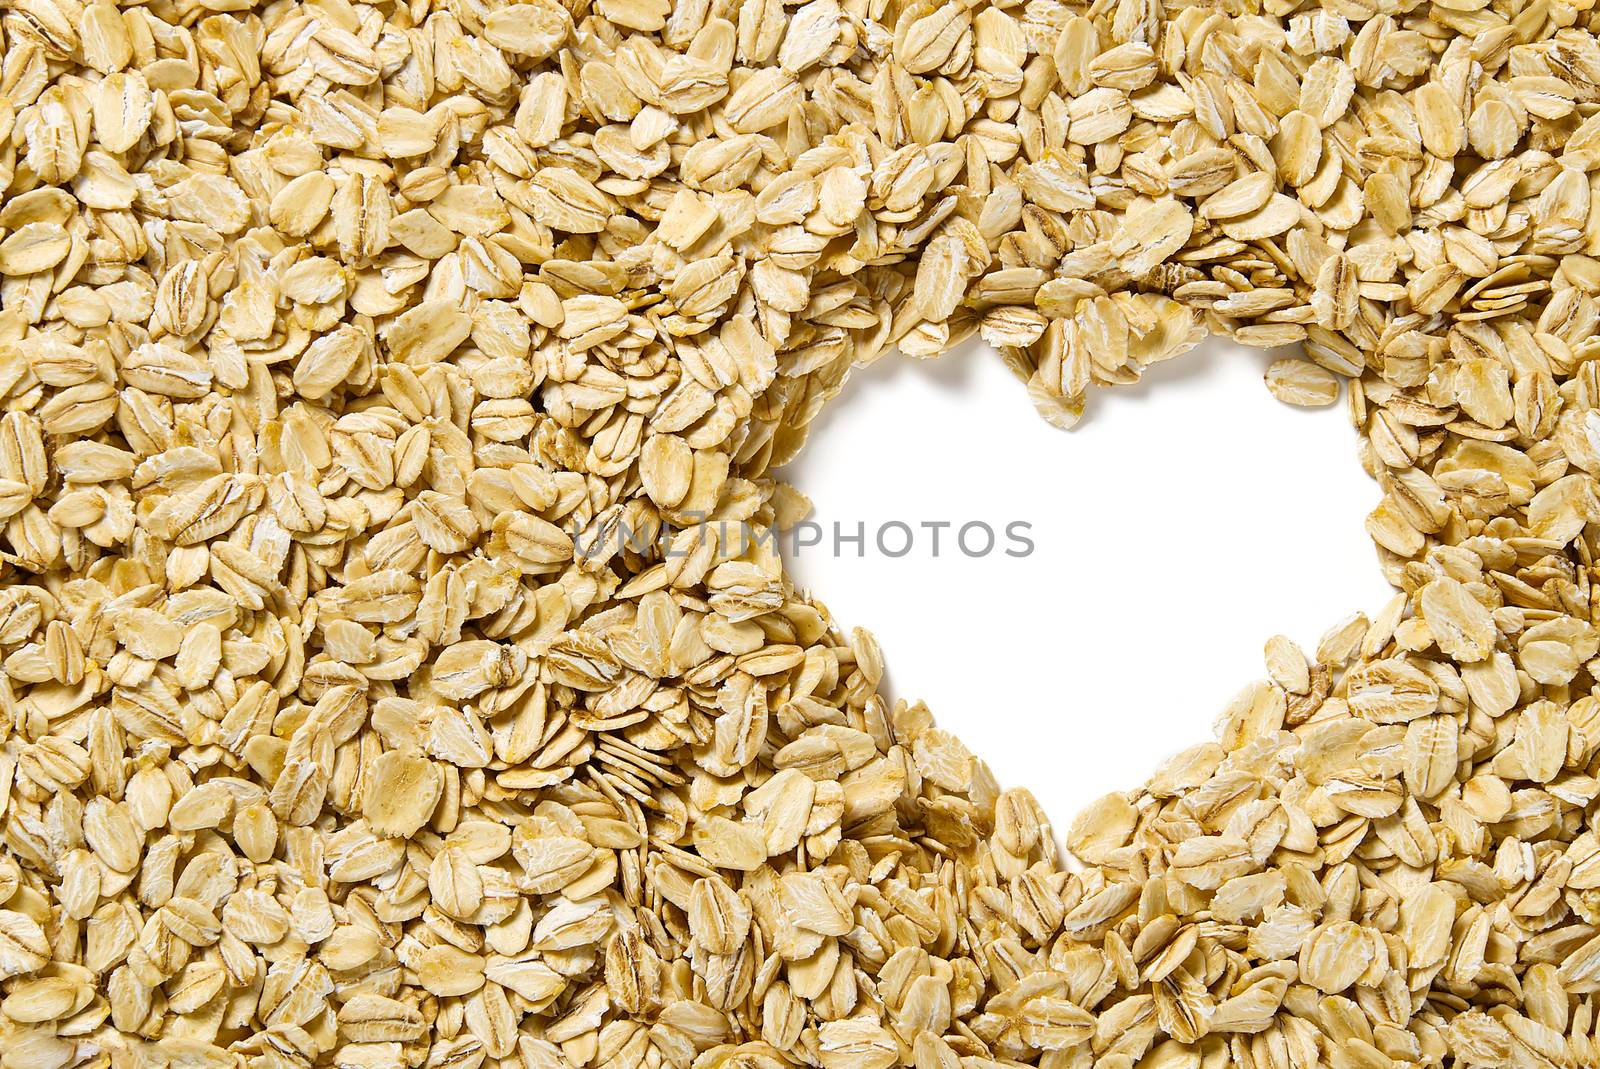 Close up of oats flakes. oats flakes macro shoot. Oatmeal flakes texture. Background of golden oat flakes.I Love Healthy food